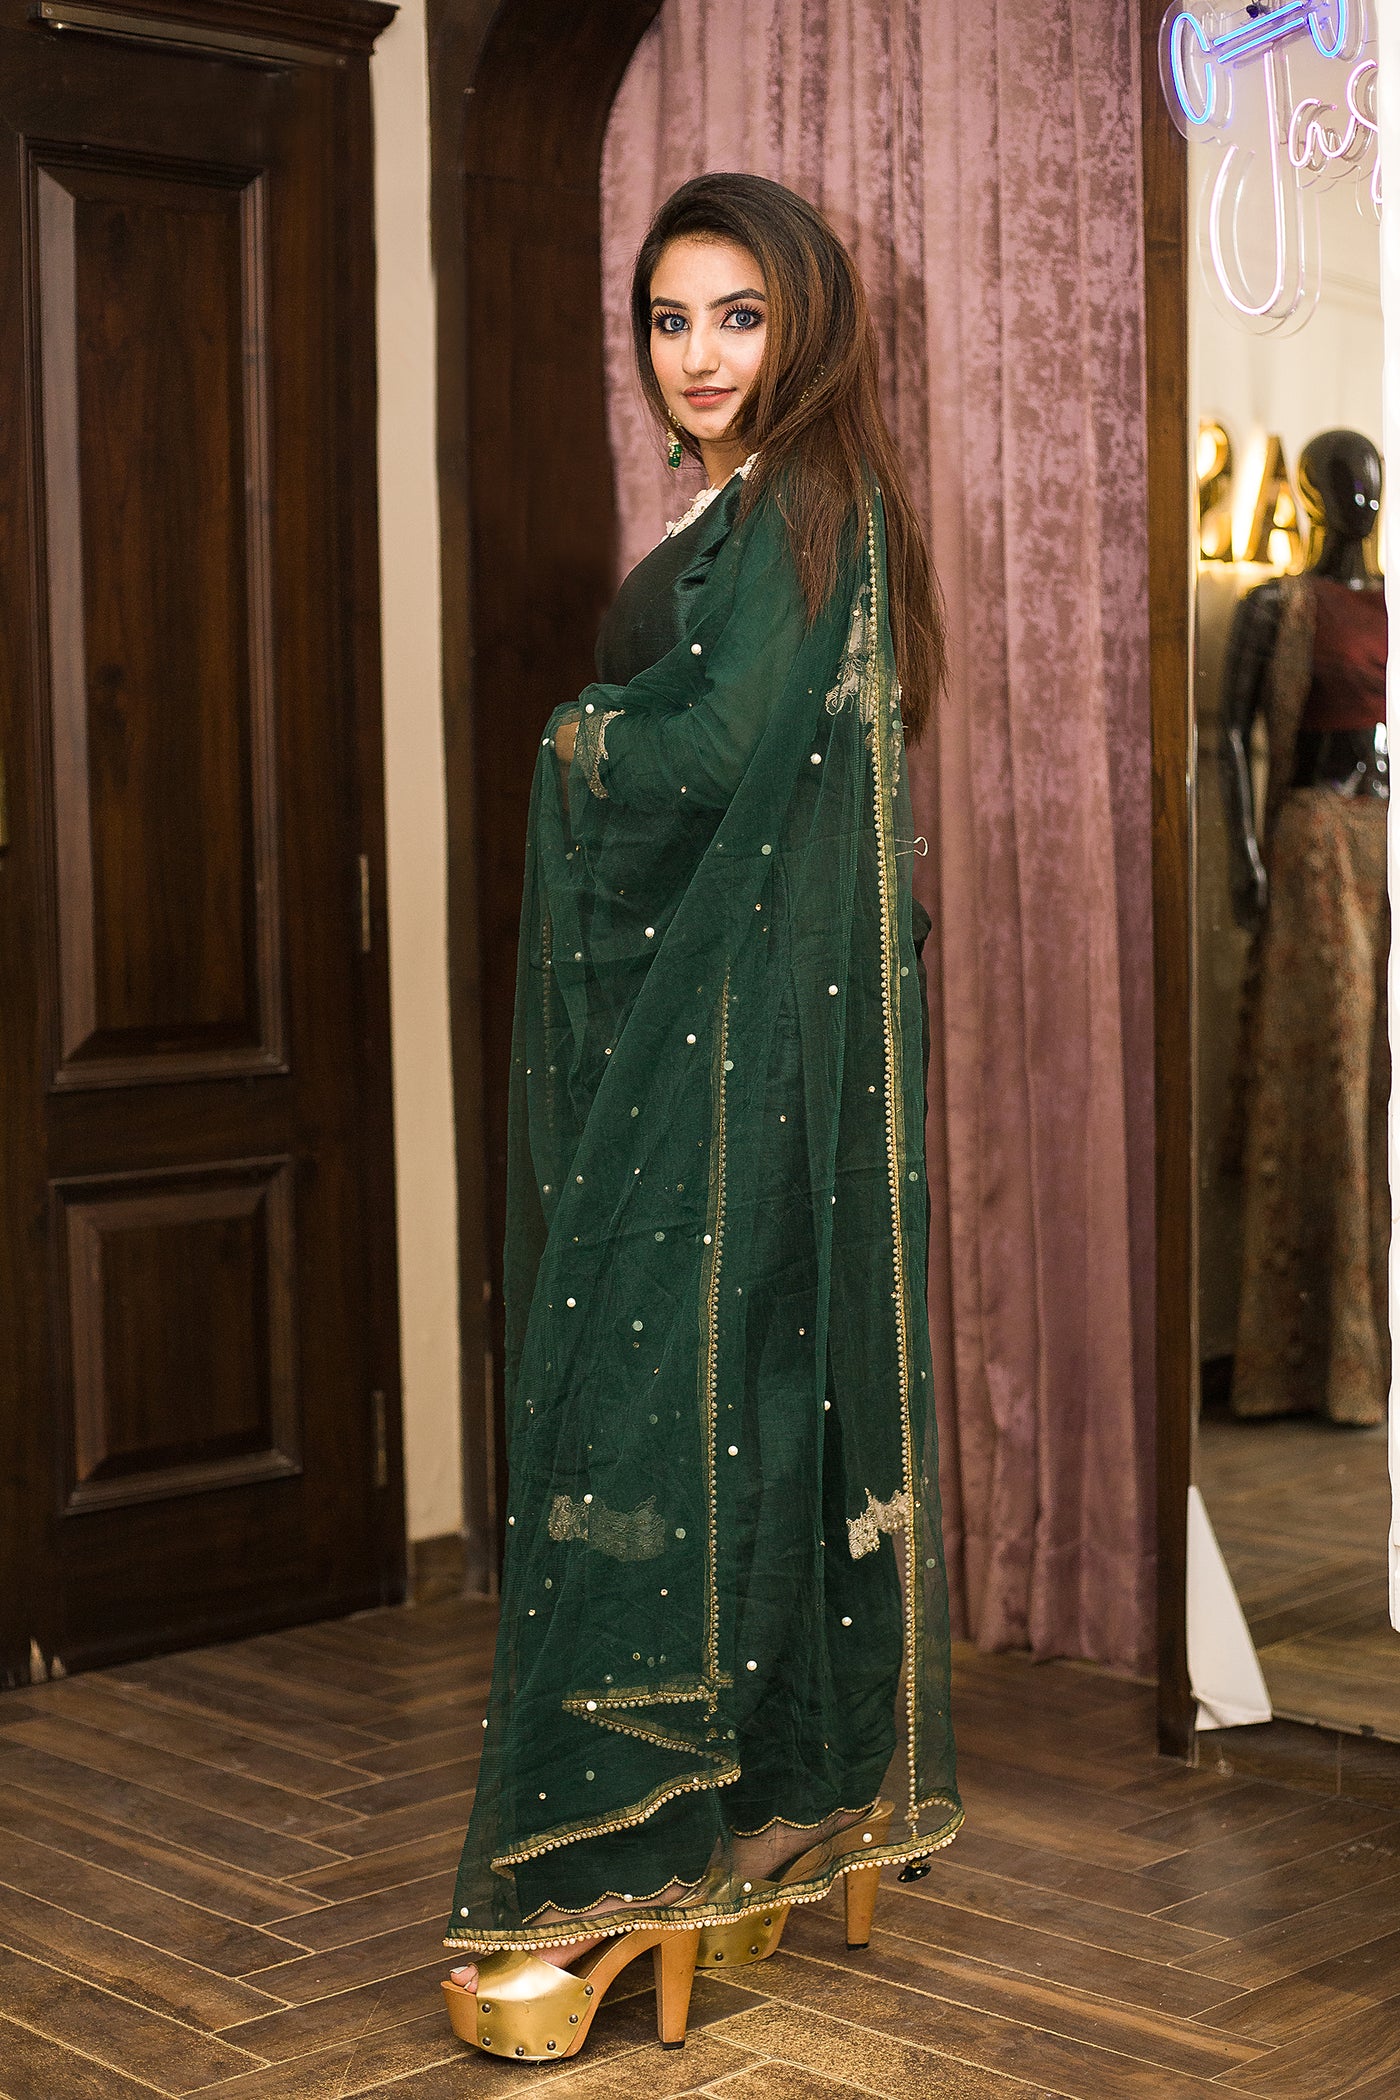 Forest Green Embroidered Salwar Suit Indian Clothing in Denver, CO, Aurora, CO, Boulder, CO, Fort Collins, CO, Colorado Springs, CO, Parker, CO, Highlands Ranch, CO, Cherry Creek, CO, Centennial, CO, and Longmont, CO. NATIONWIDE SHIPPING USA- India Fashion X